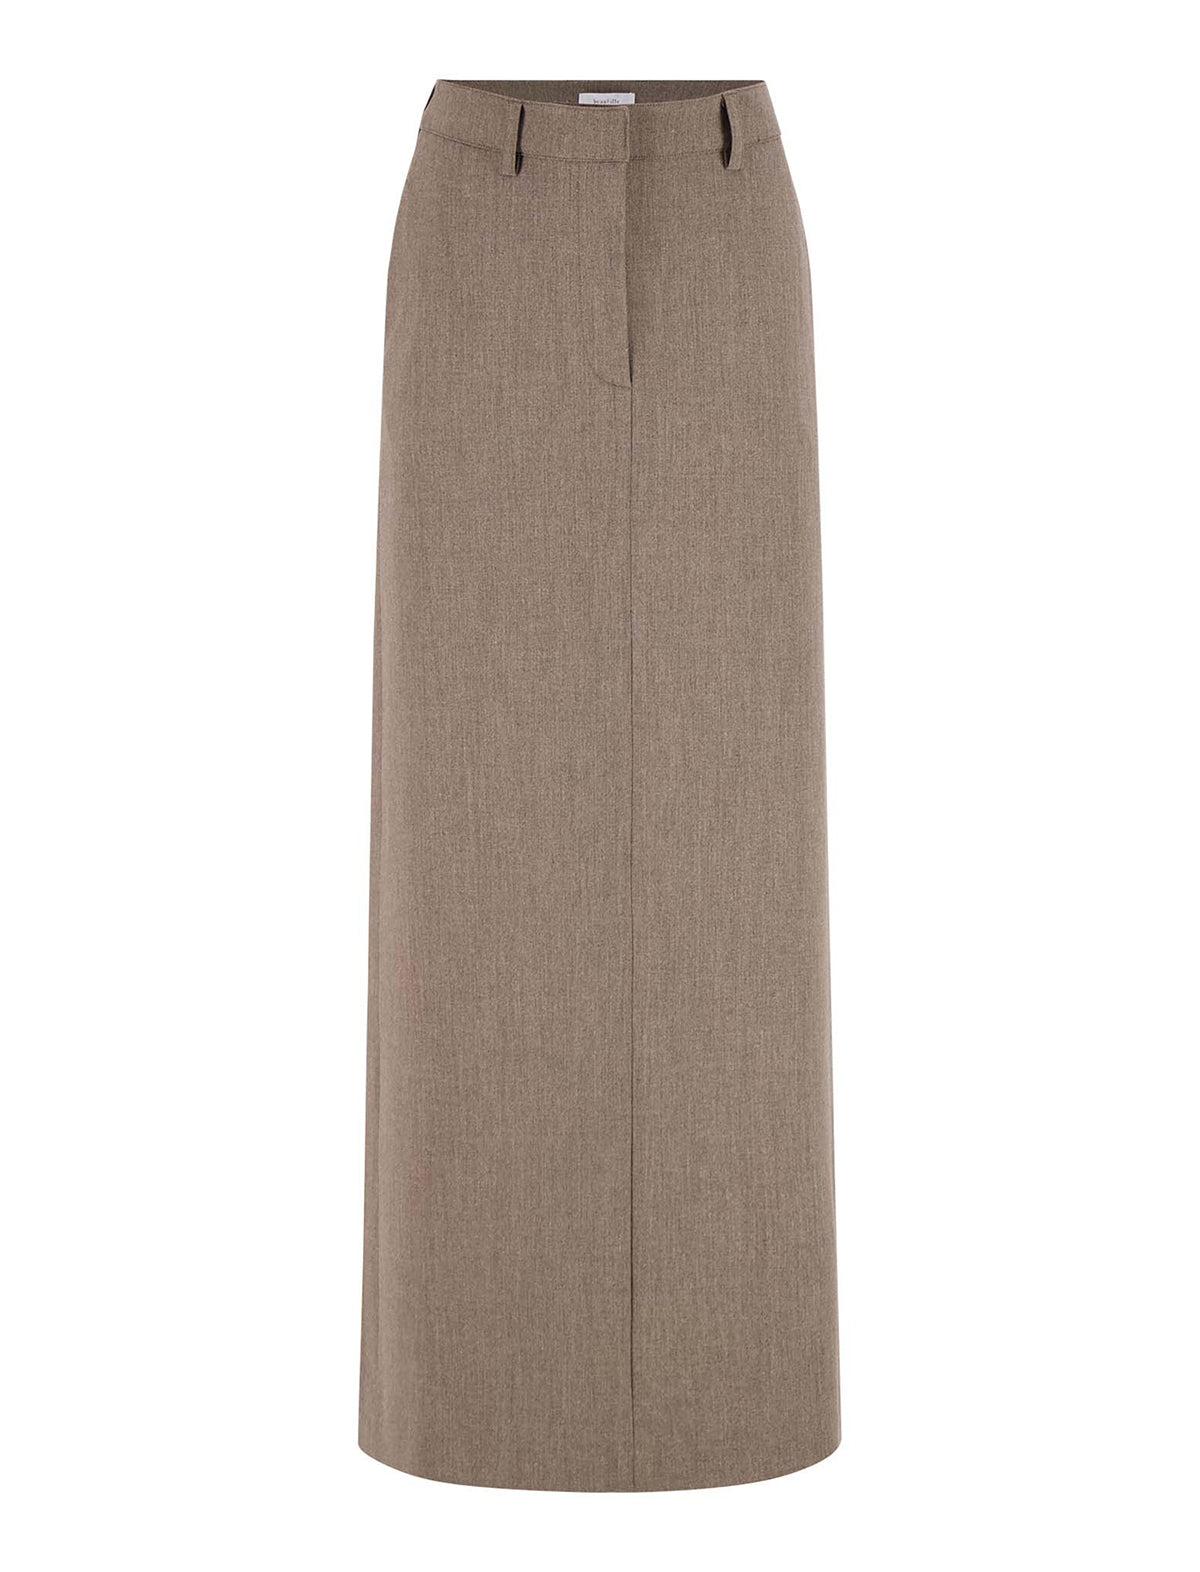 BEAUFILLE Minter Mixi Skirt in Heather Brown